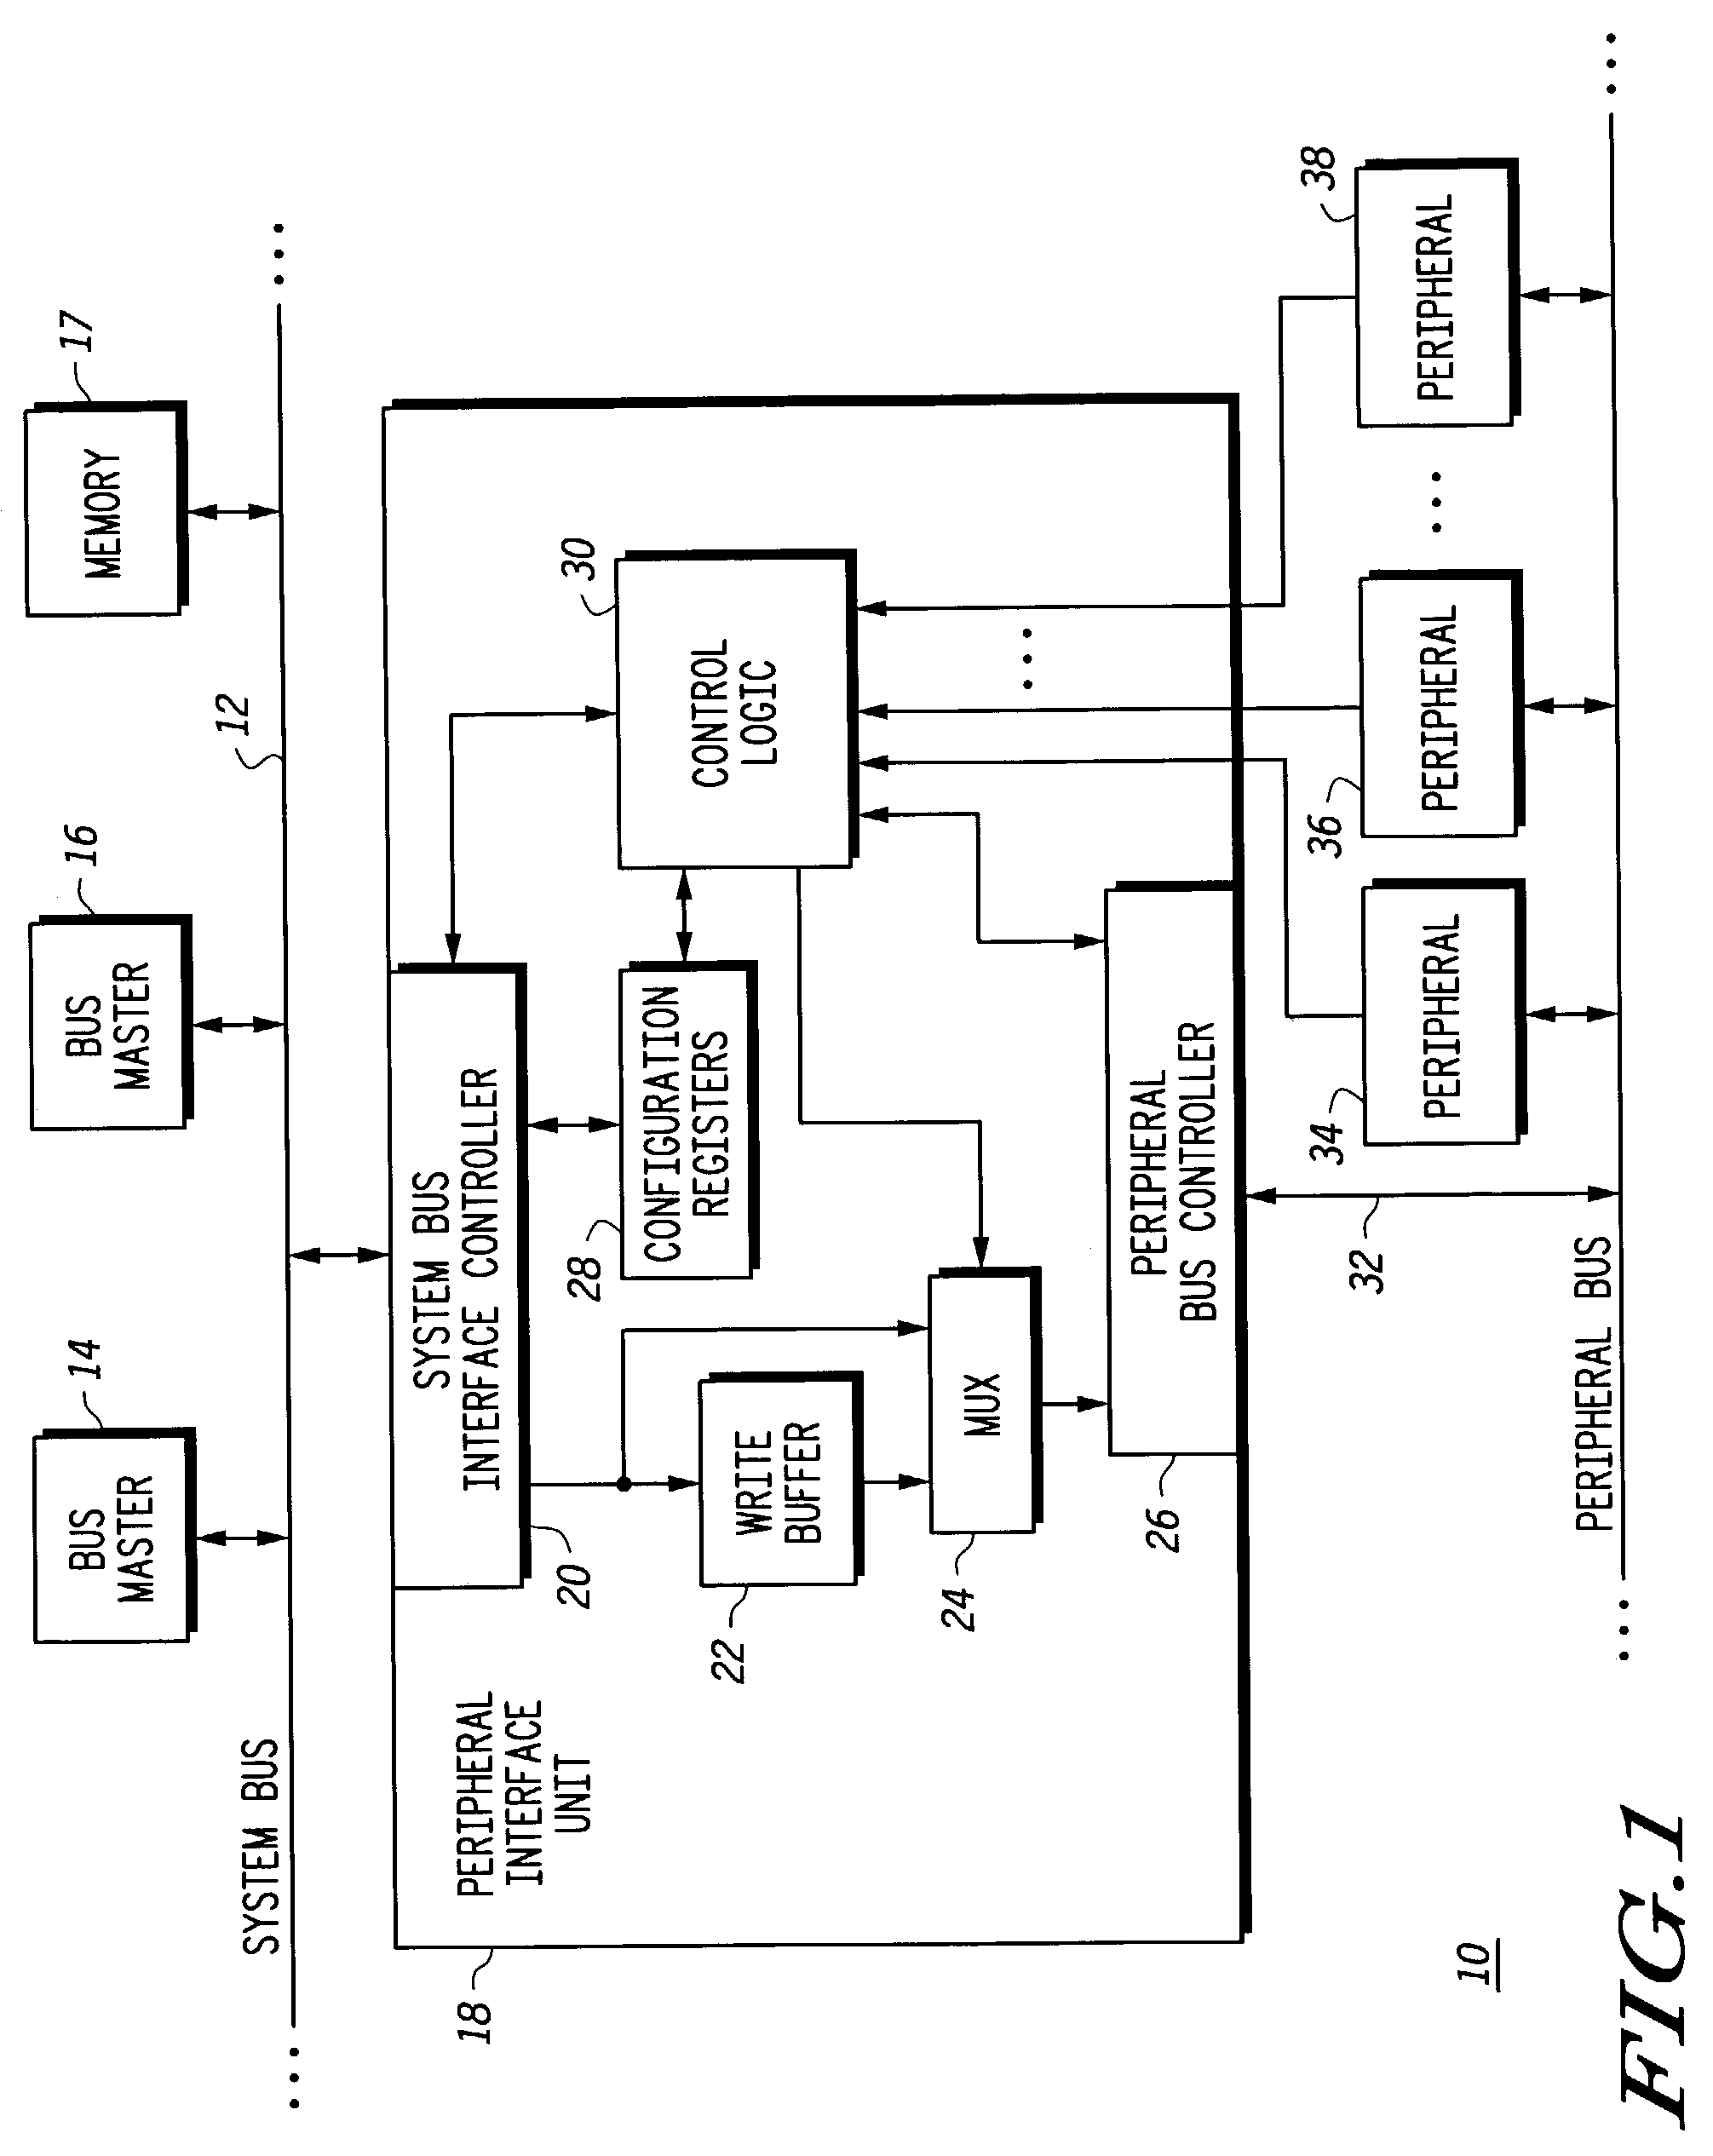 Shared write buffer in a peripheral interface and method of operating